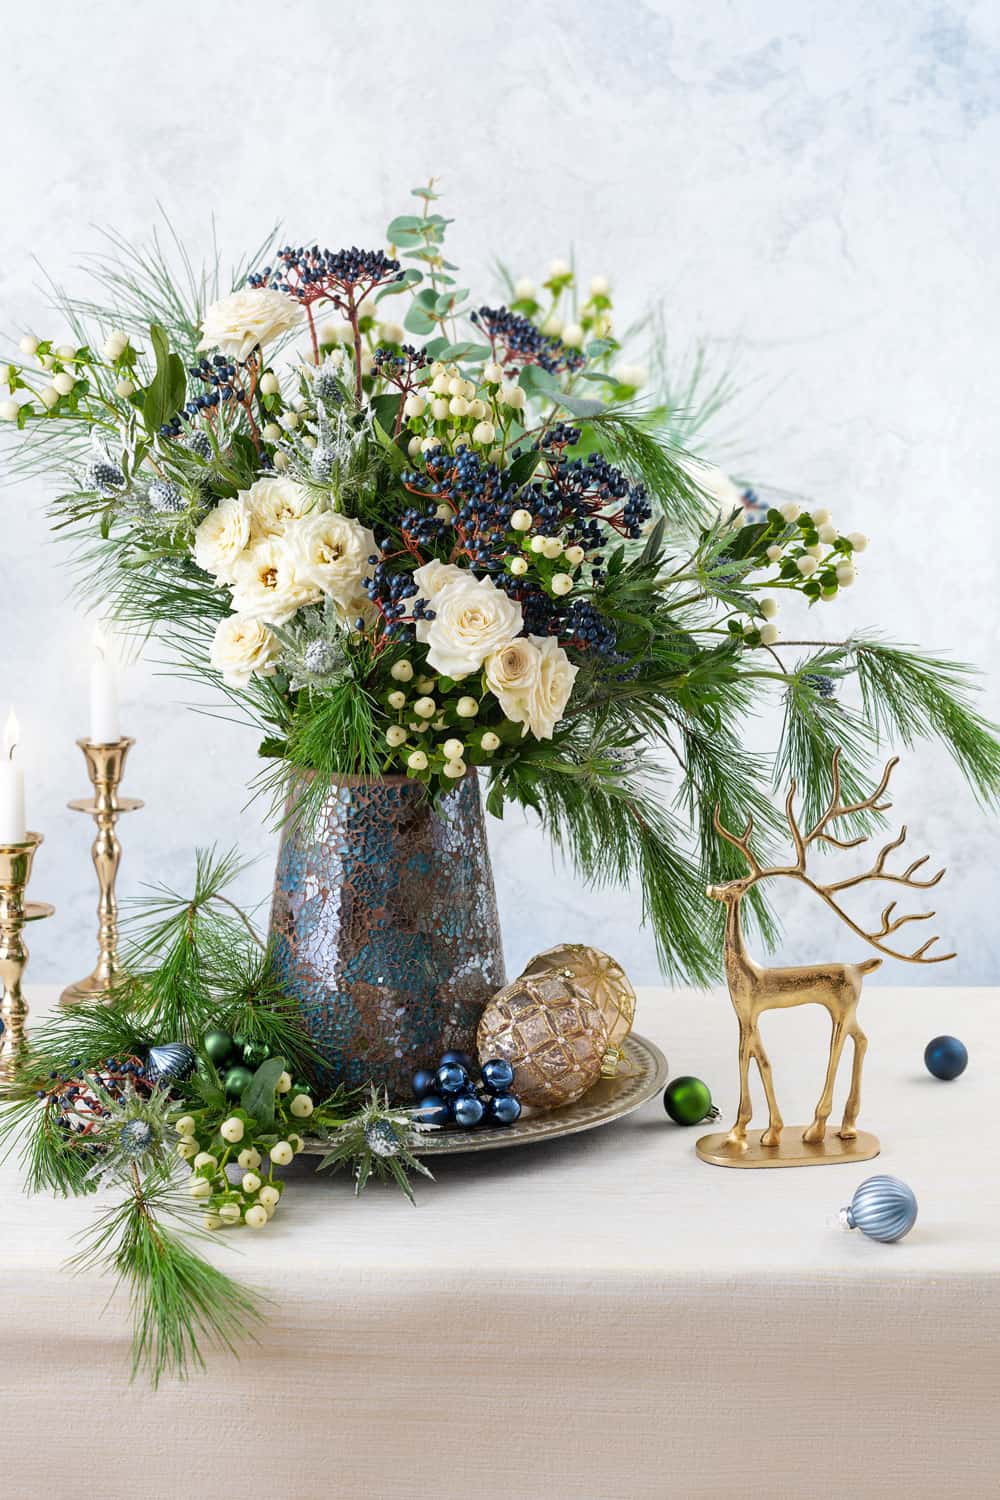 Christmas decorations, candles and flower bouquet